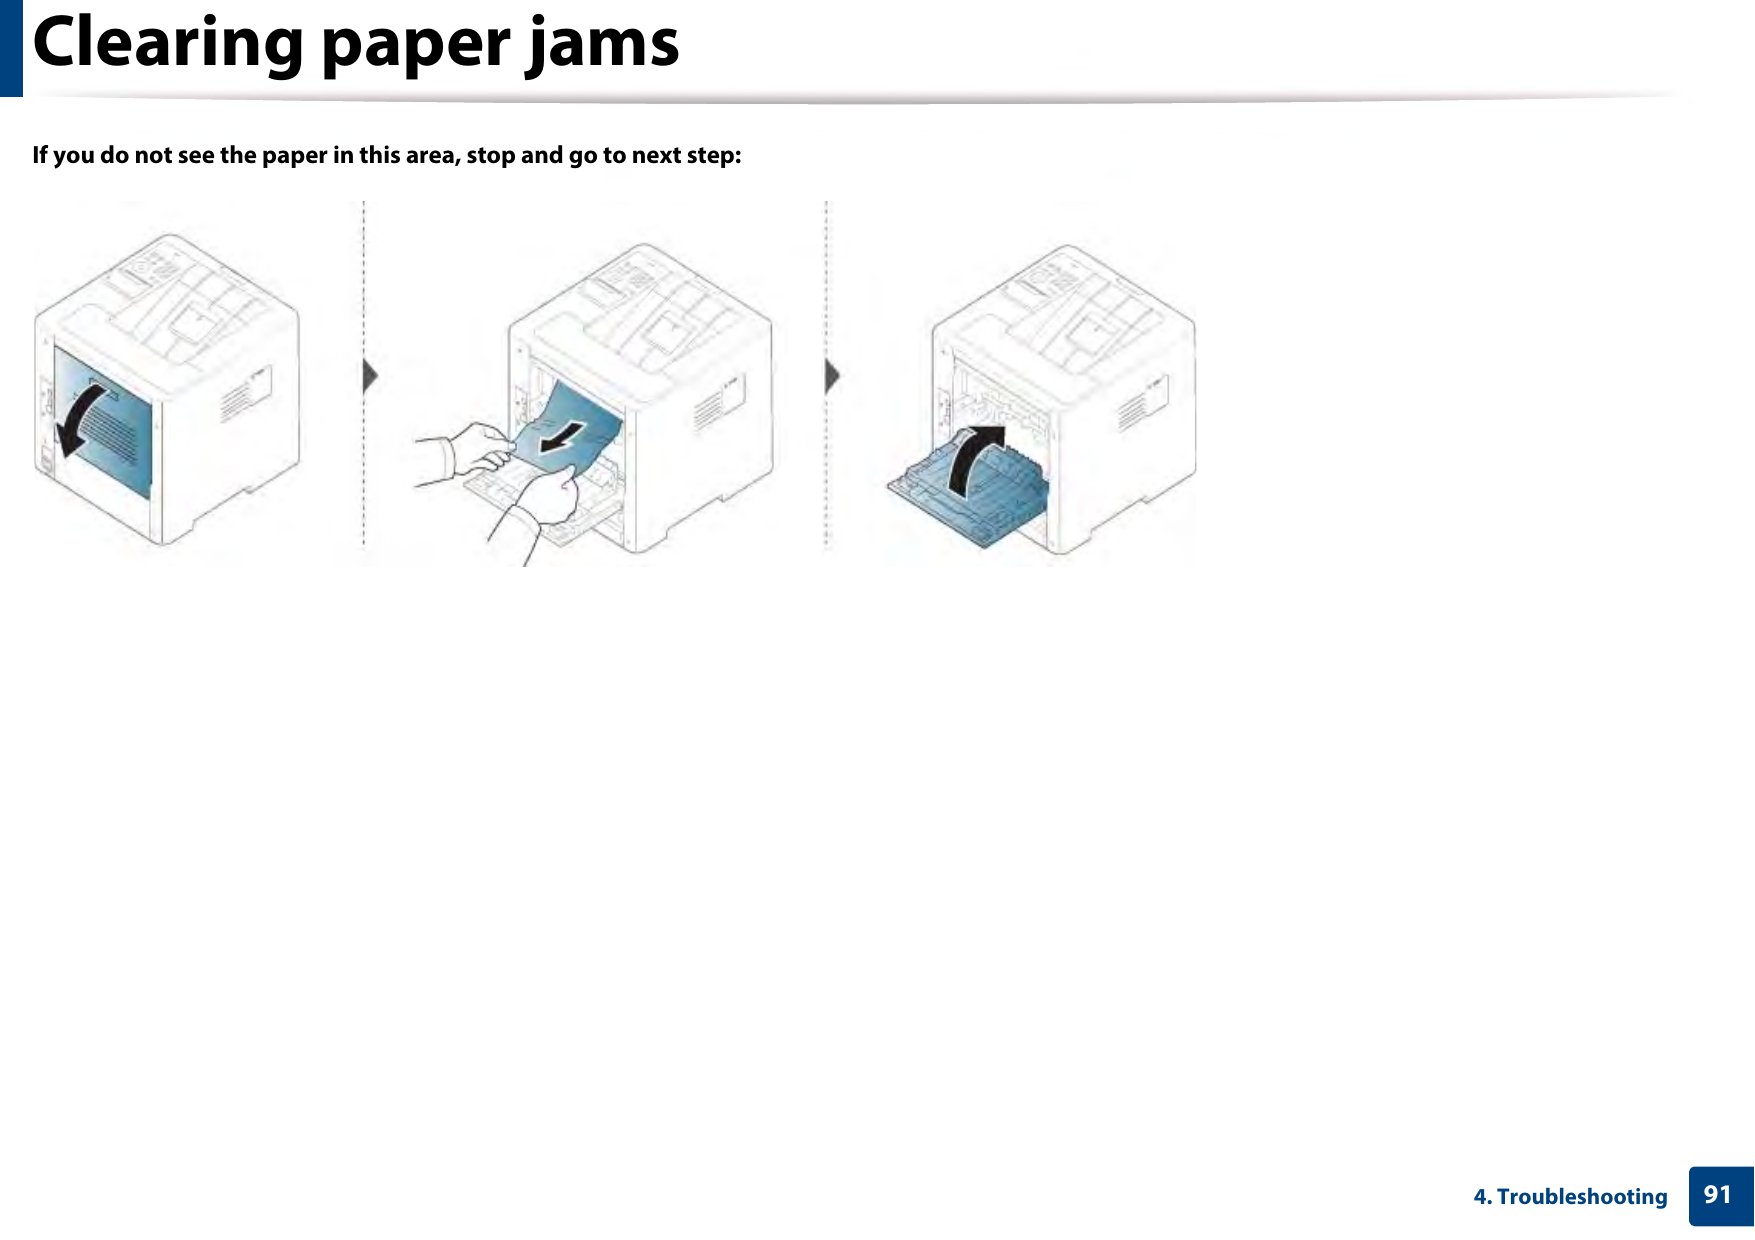 Clearing paper jams914. TroubleshootingIf you do not see the paper in this area, stop and go to next step: